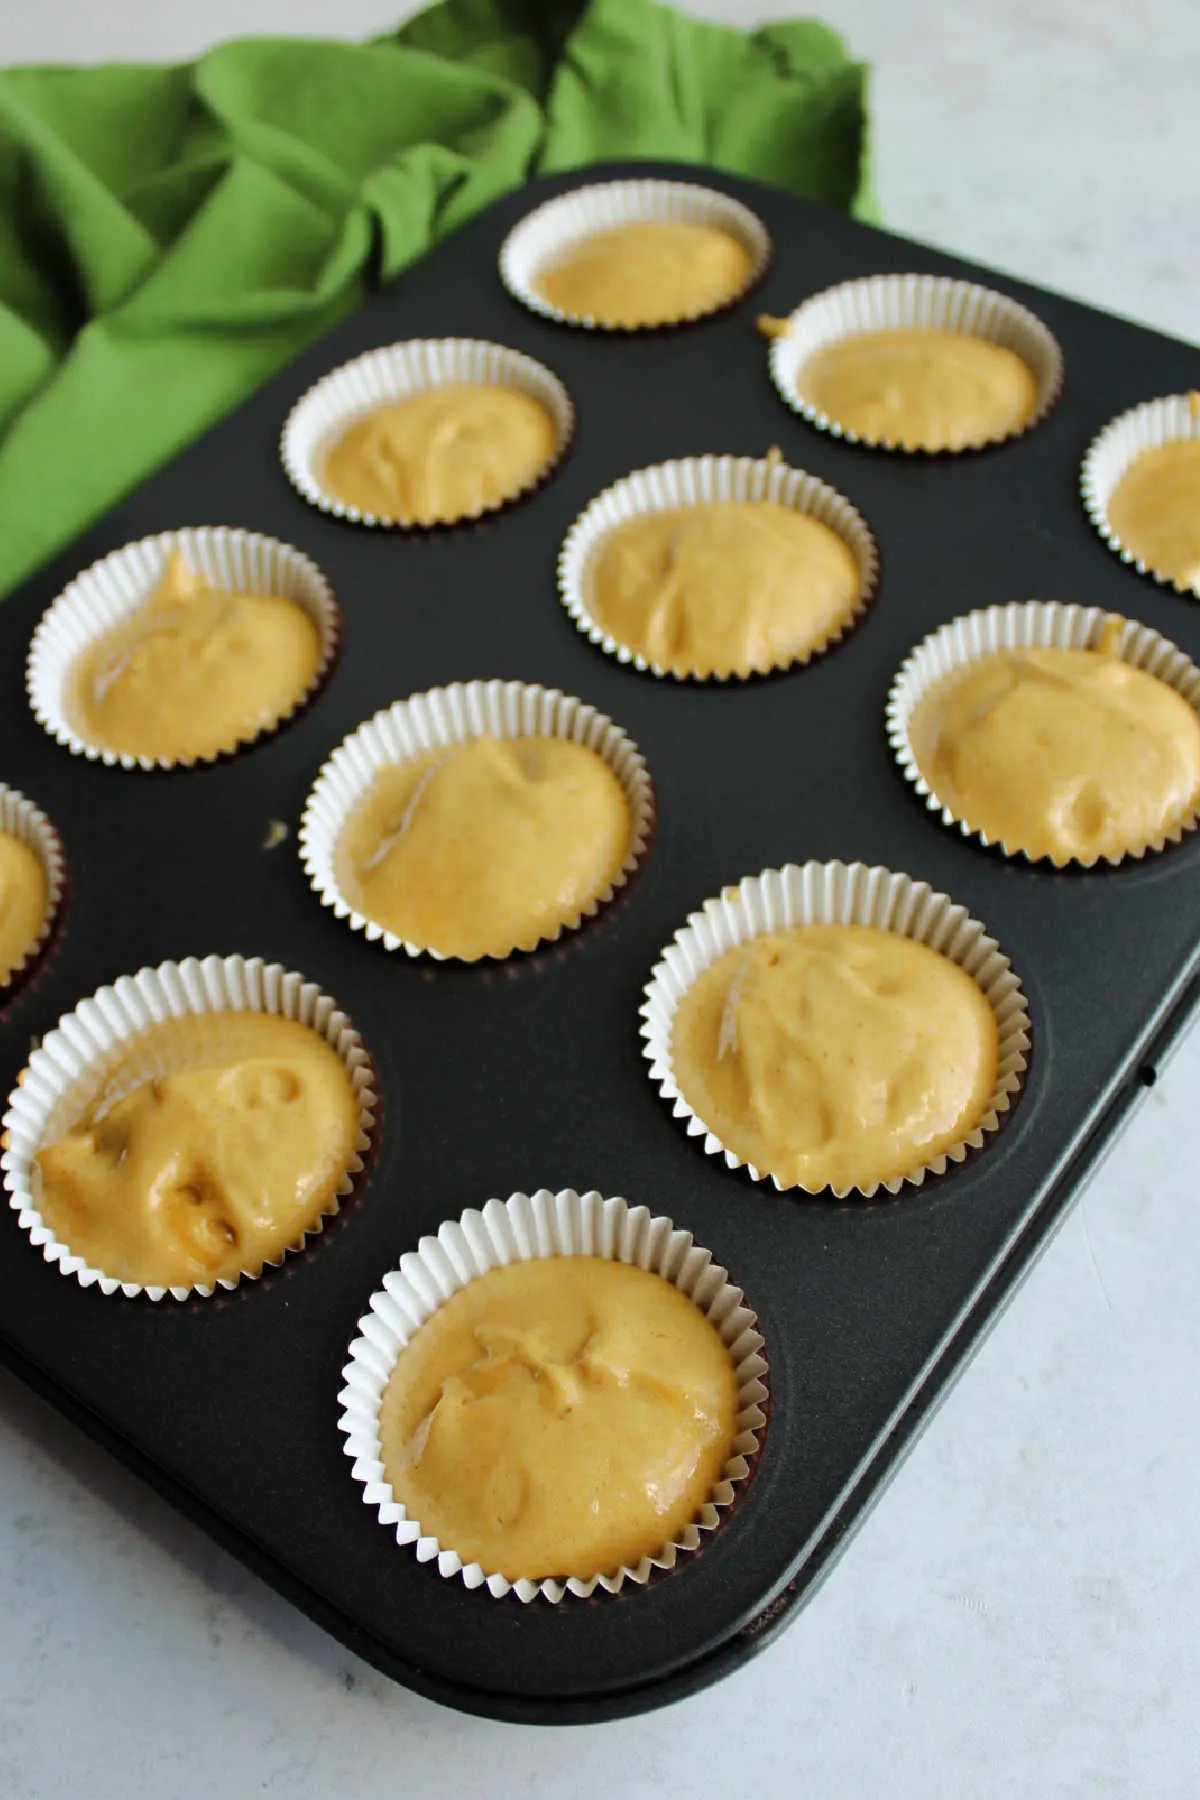 Apple butter cake batter scooped into paper lined mini cupcake tin.